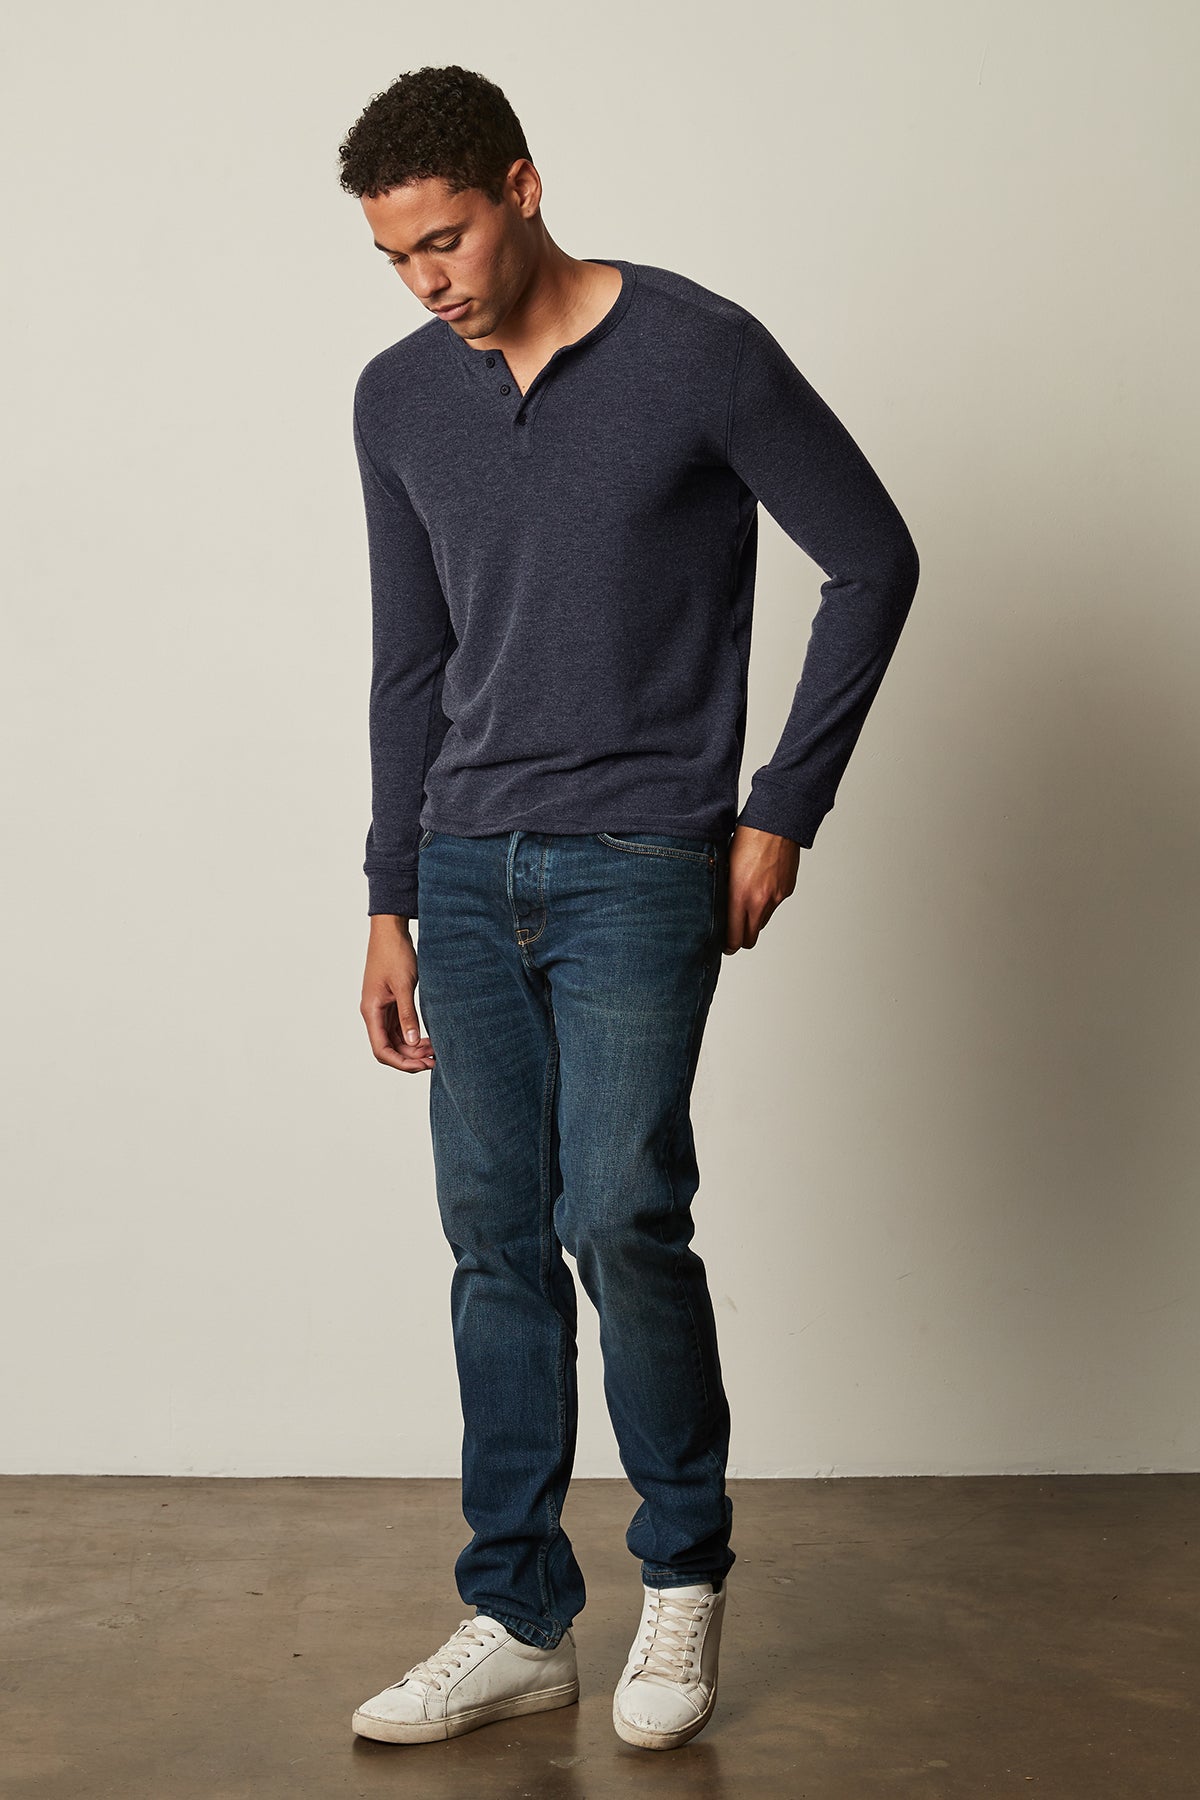 A versatile man, donning Velvet by Graham & Spencer jeans and a FAUST COZY JERSEY HENLEY sweater, confidently poses in front of a white wall.-25484011798721